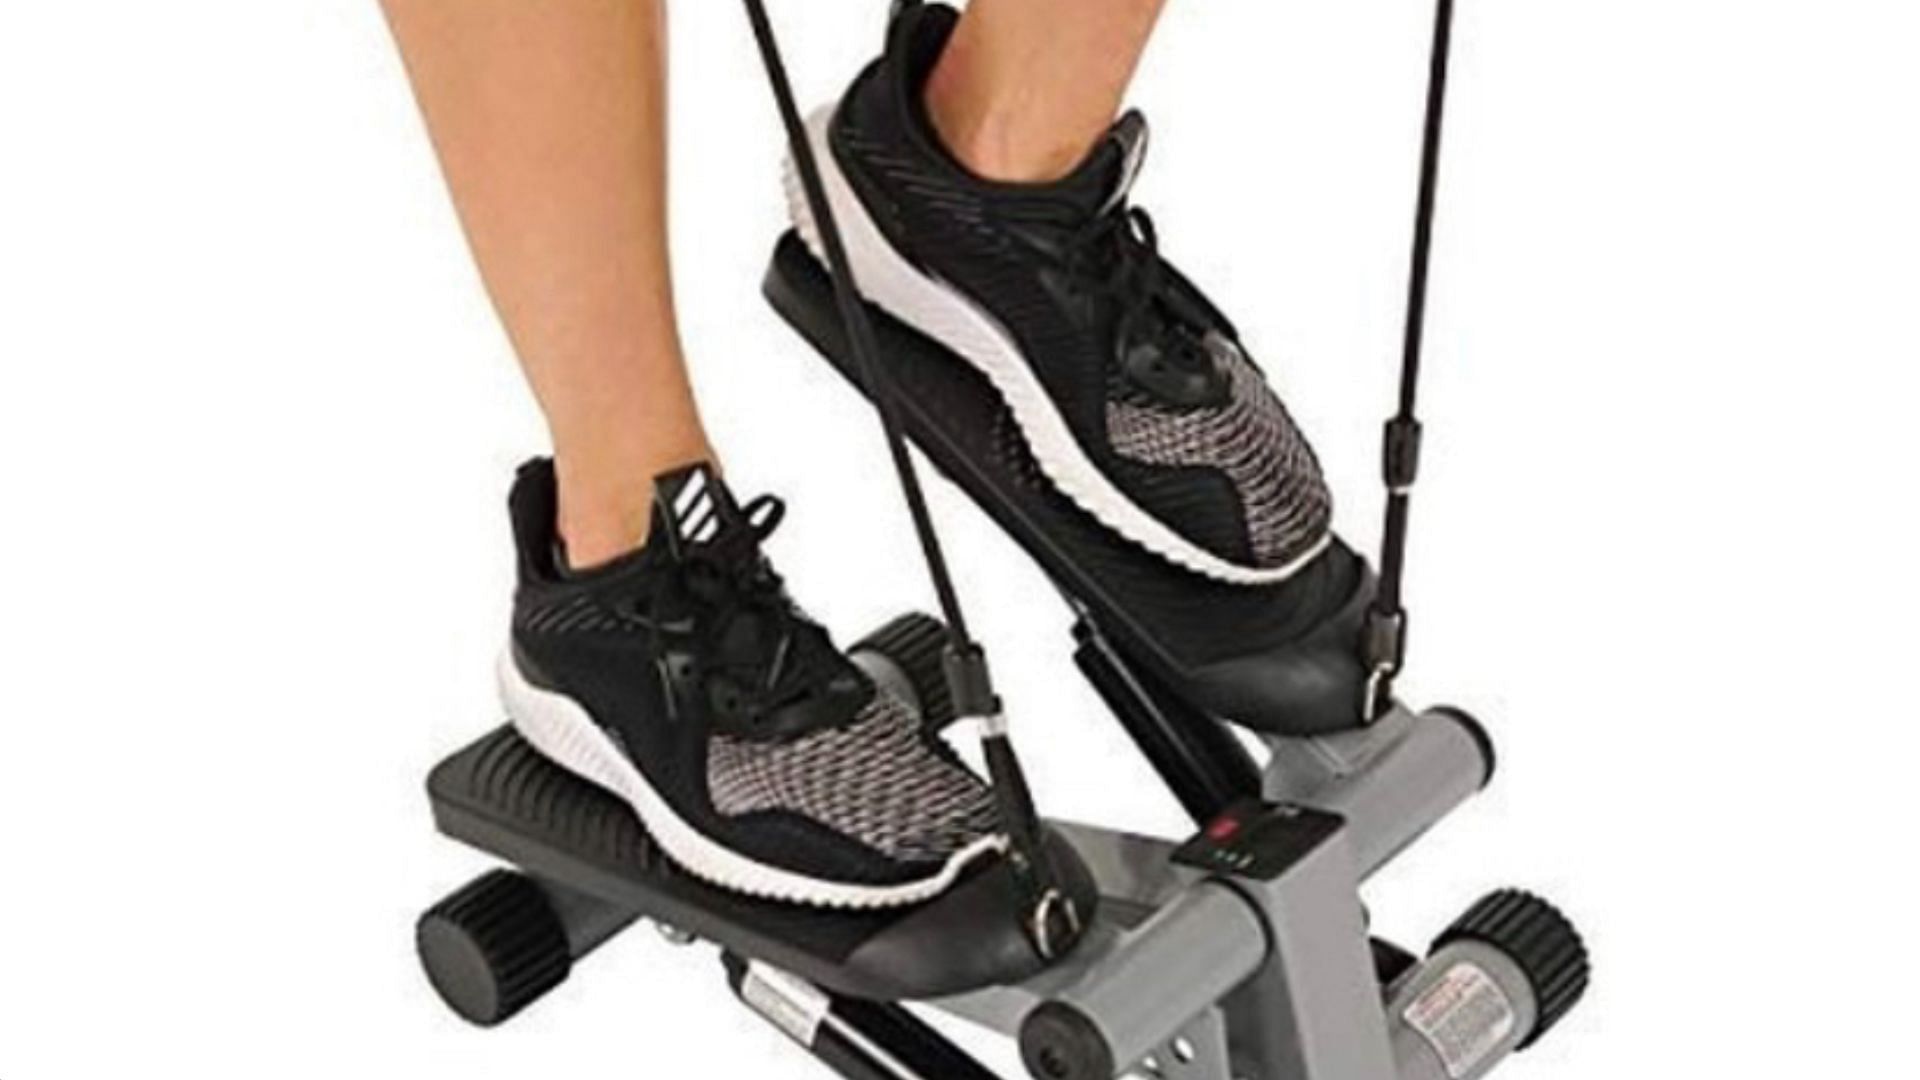 Mini stepper workout benefits: All you need to know